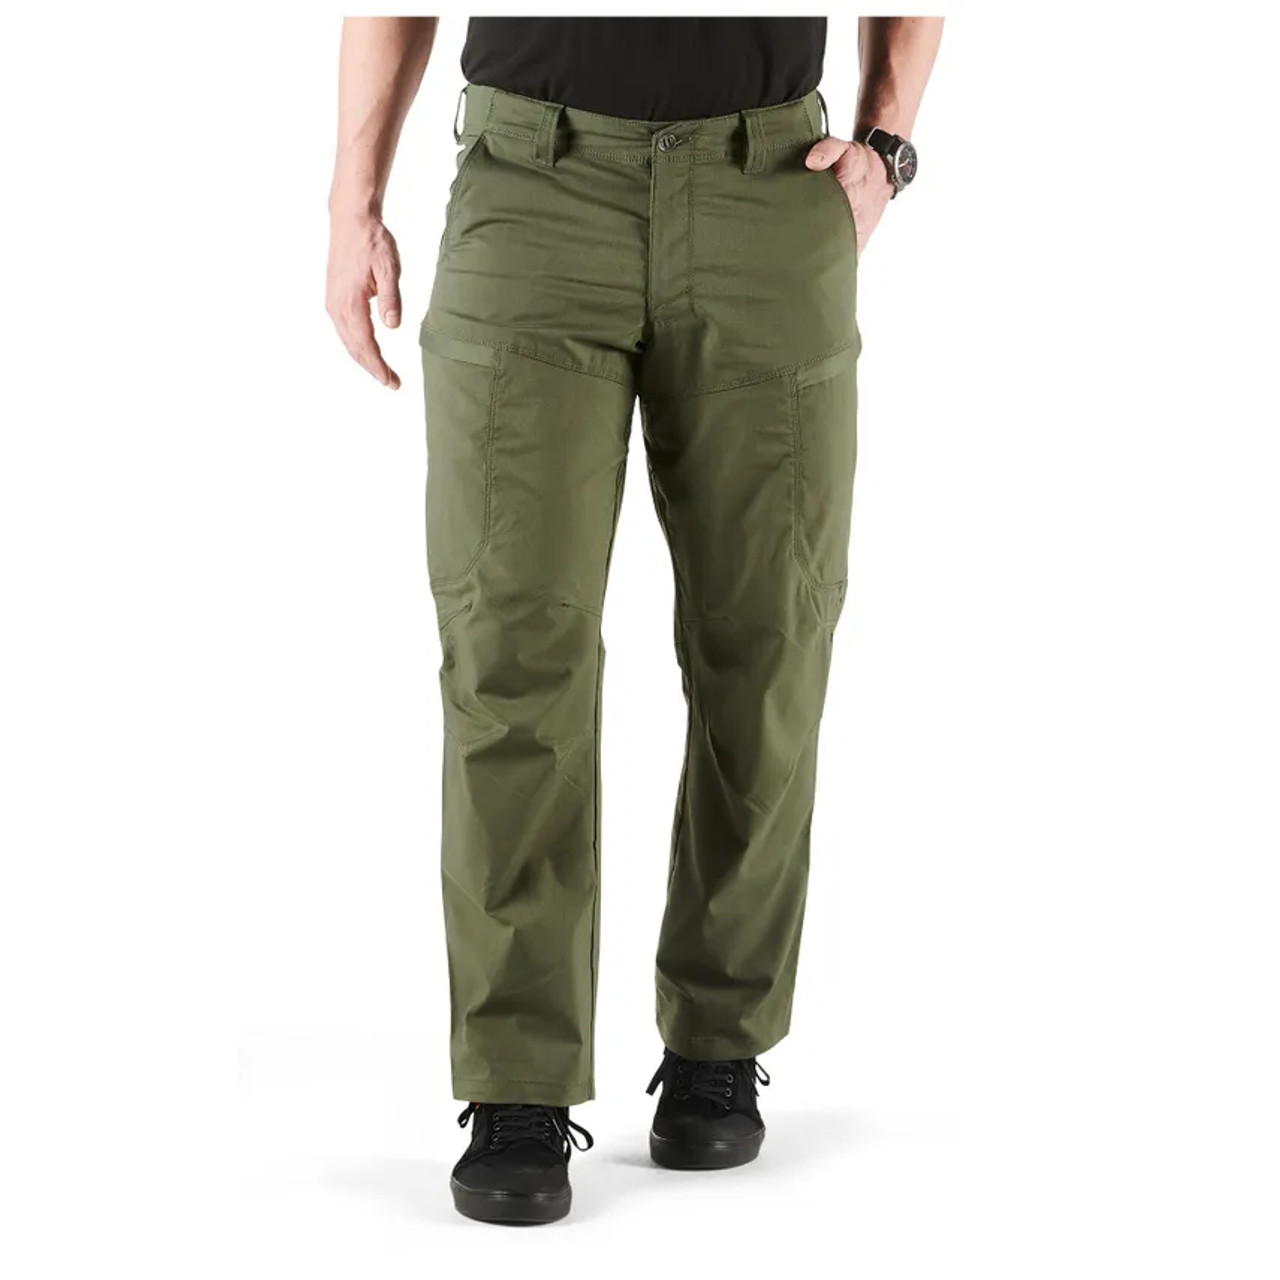 Men's 5.11 Tactical Pants | Clothing: Men for sale on Fort Campbell bookoo!